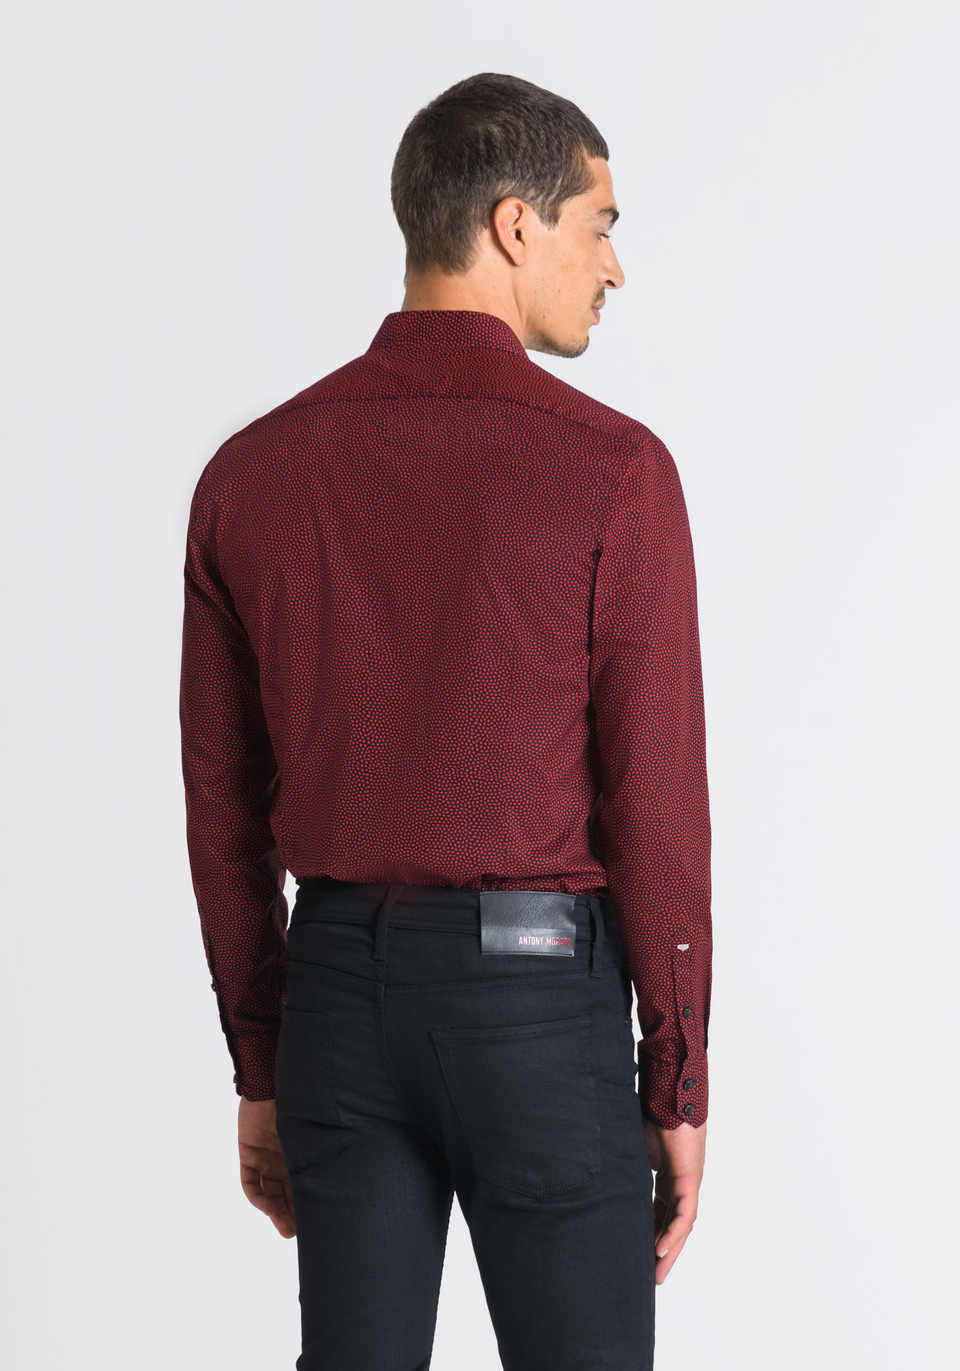 SLIM-FIT SHIRT MADE OF SOFT COTTON WITH MICRO-PATTERN PRINT - Antony Morato Online Shop